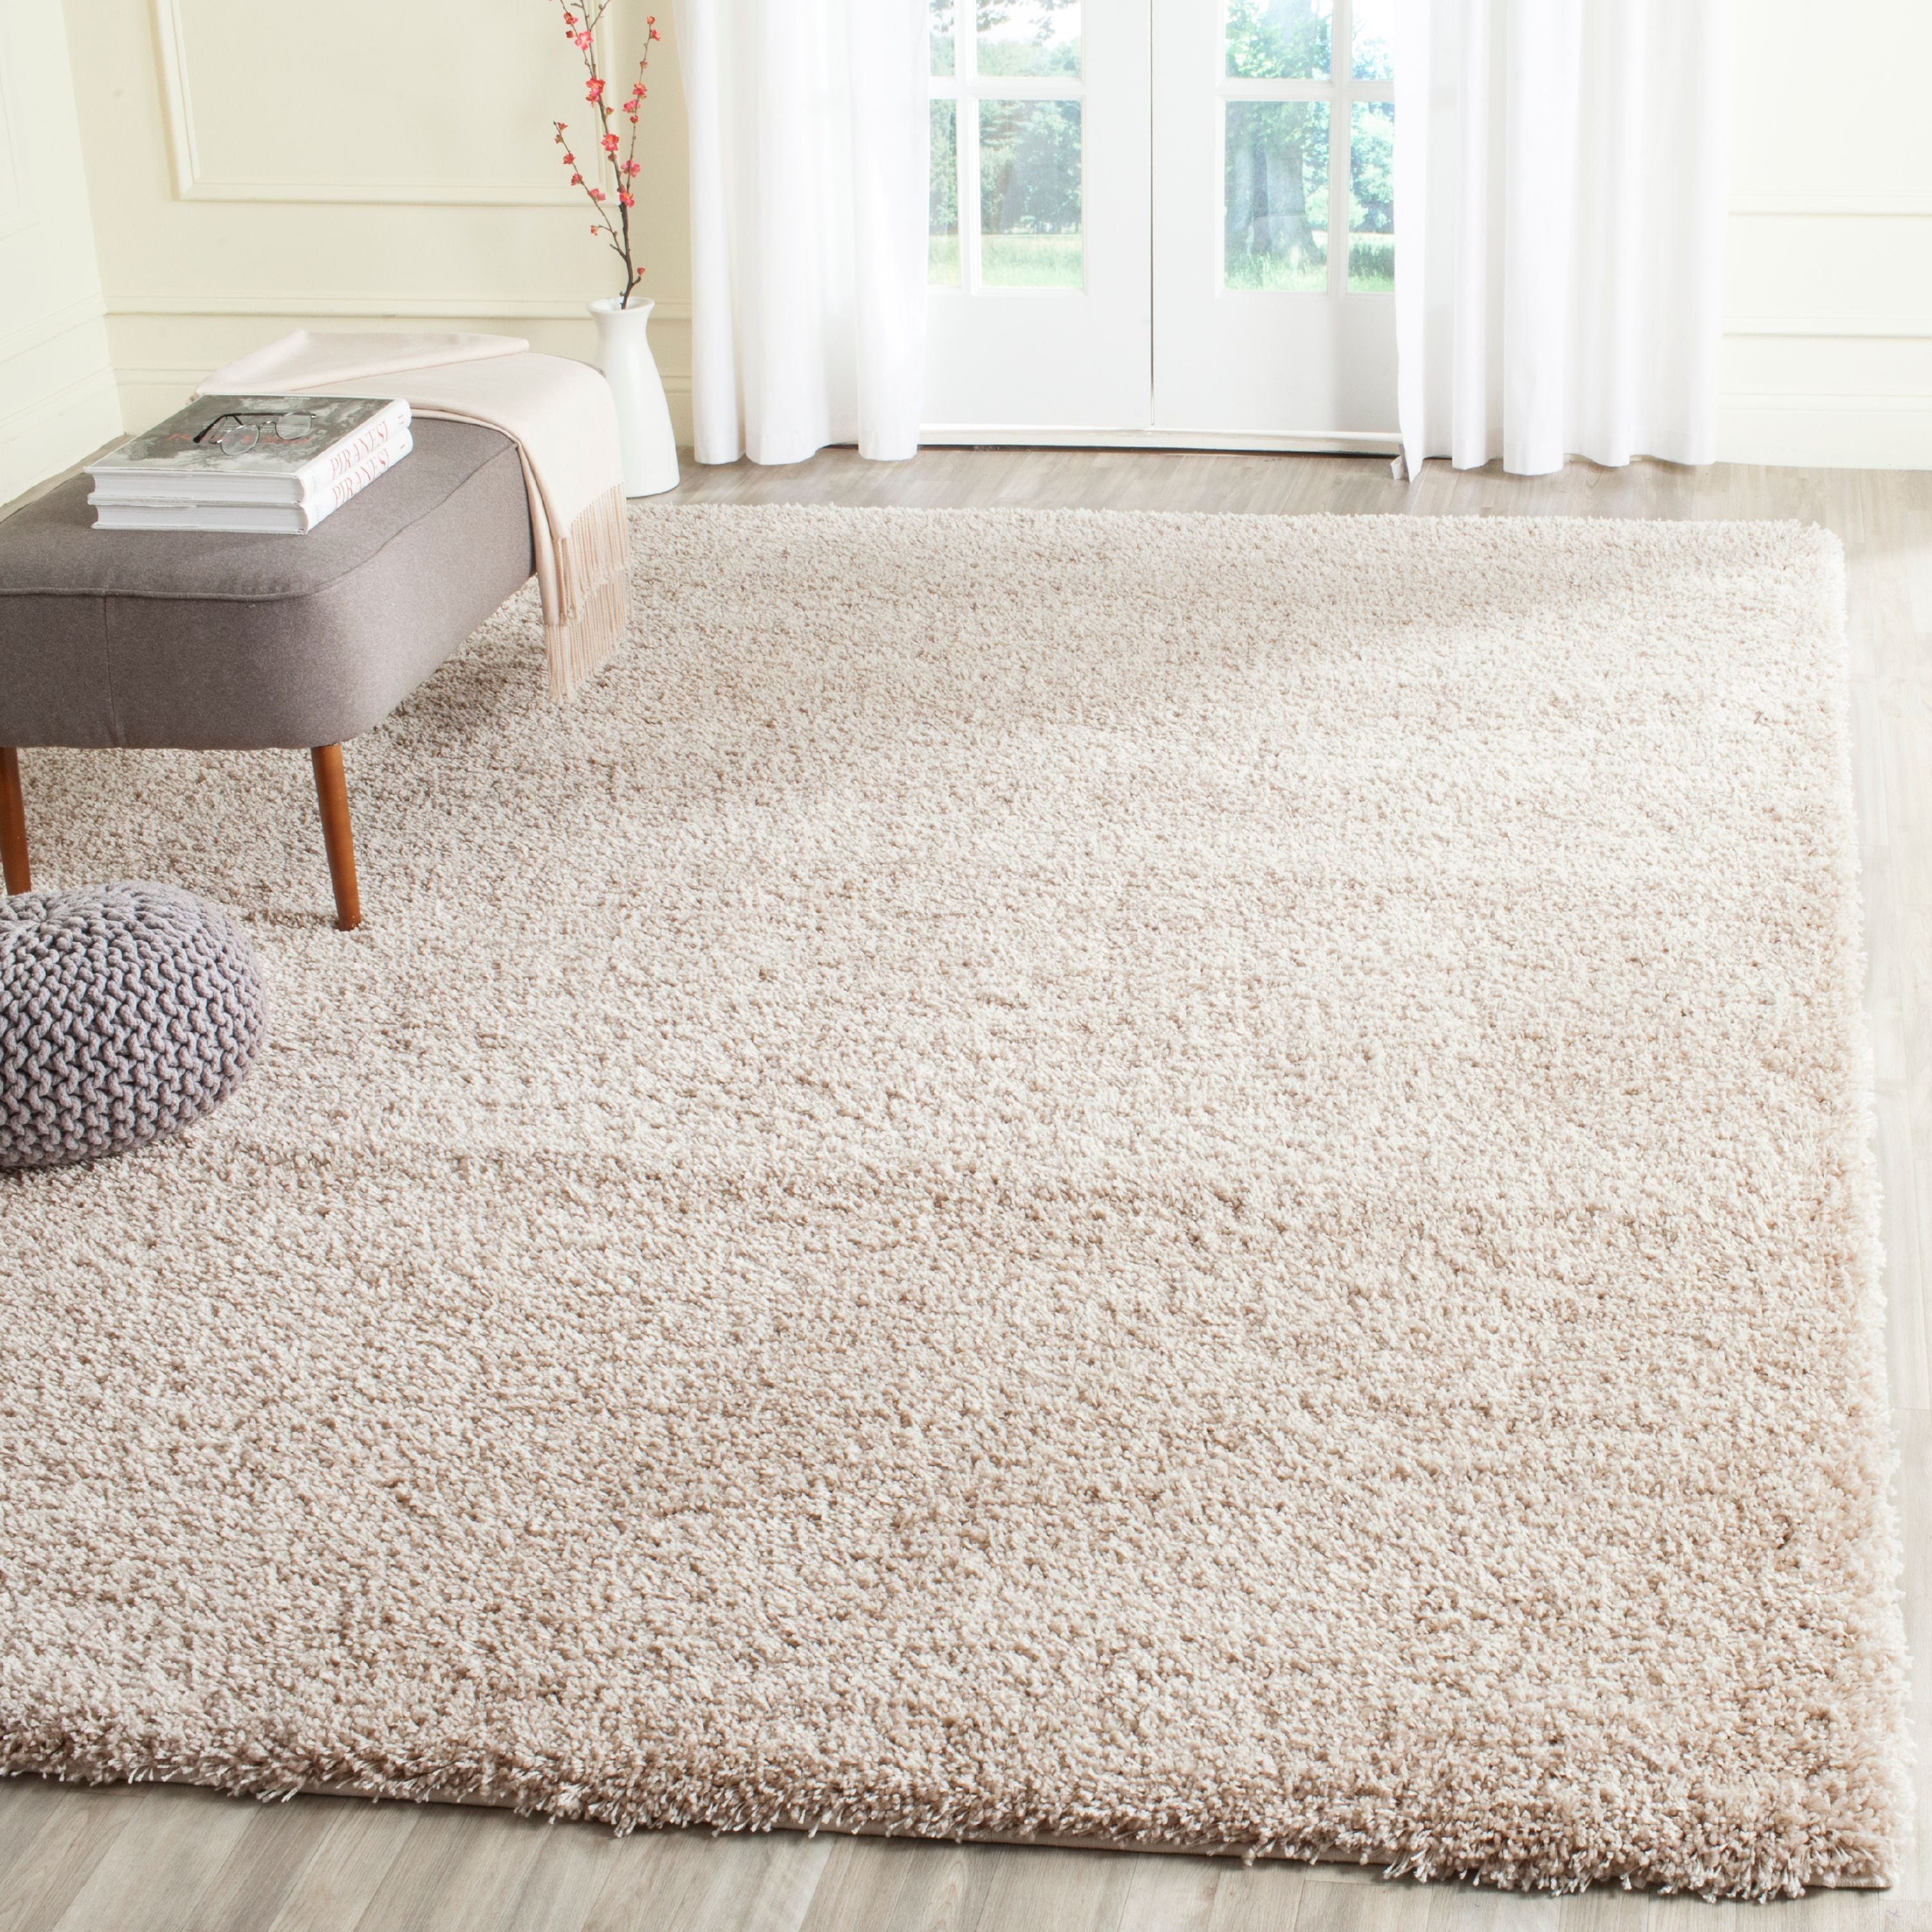 Grey Shaggy Rugs High Quality Fluffy Thick Dense Shag Pile Carpet Rugs Non Shed 